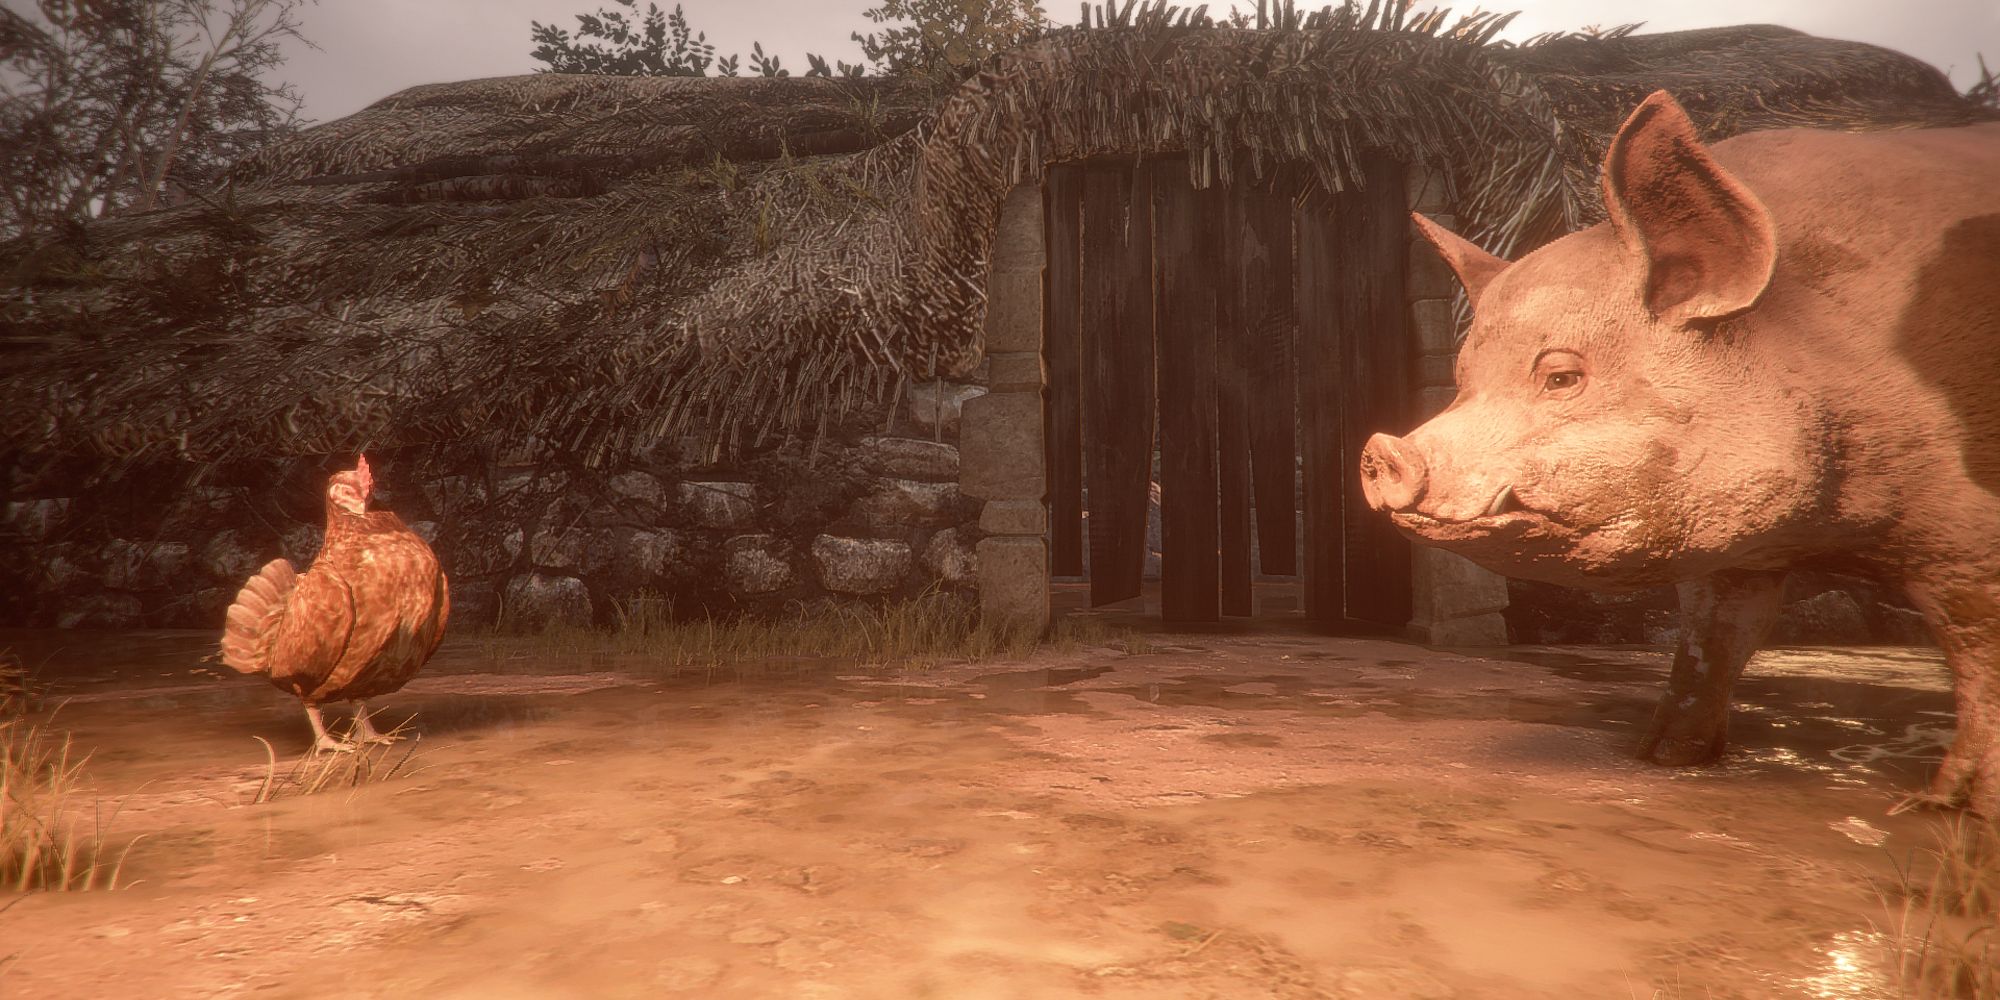 Plague tale pig and chicken